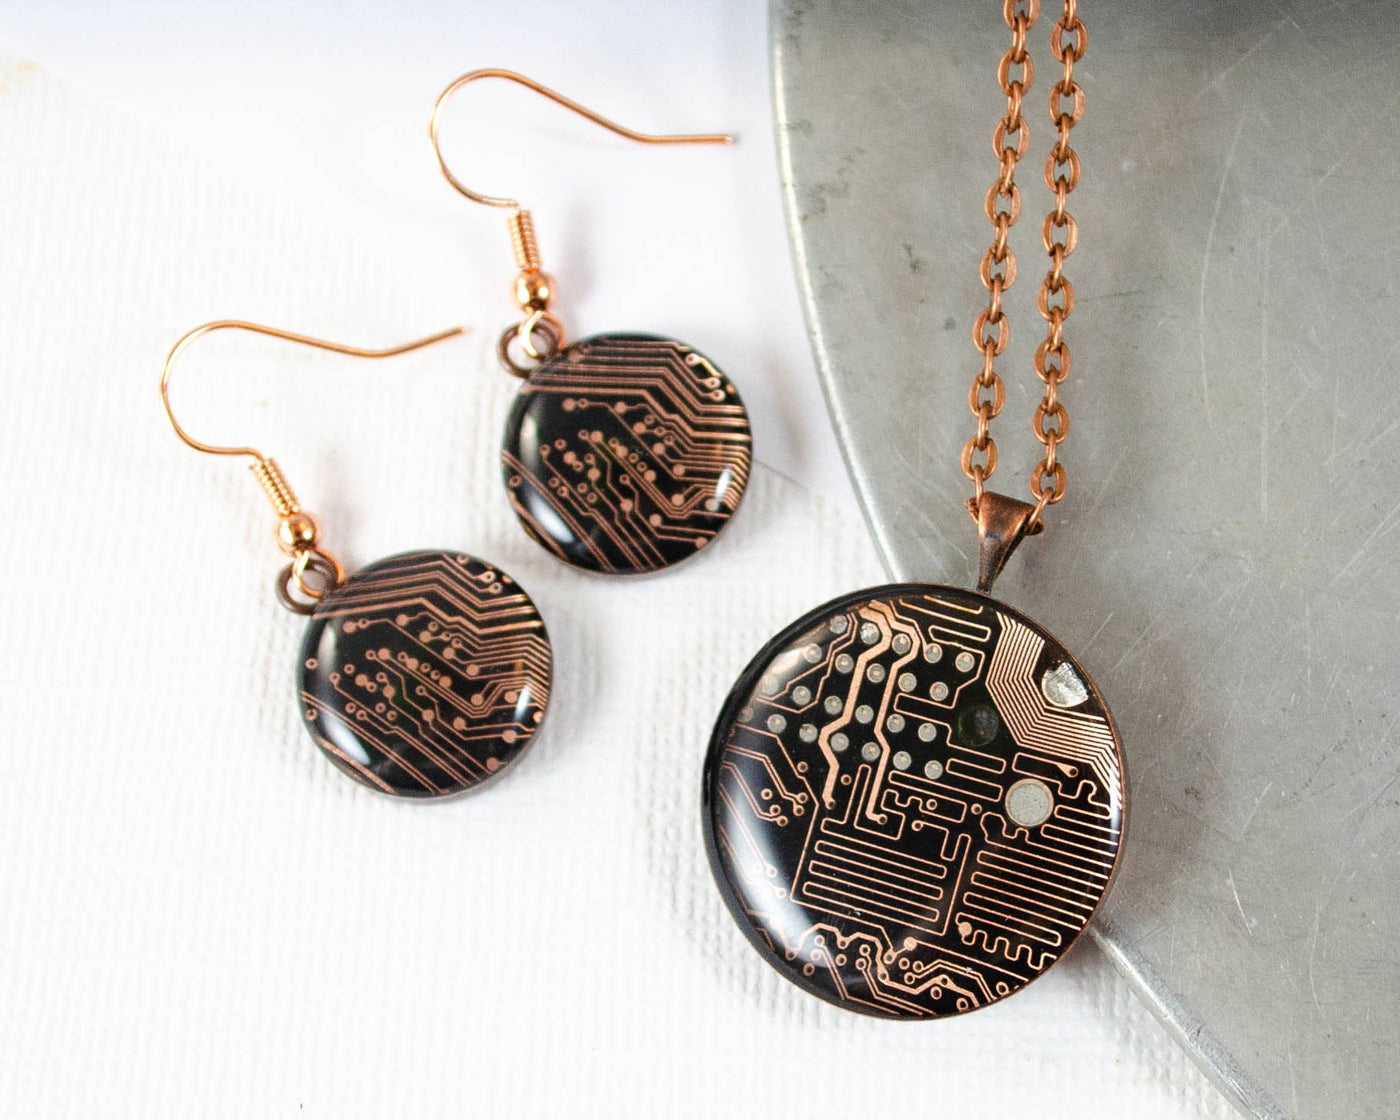 handmade necklace and earrings set made from recycled circuit board and set in copper